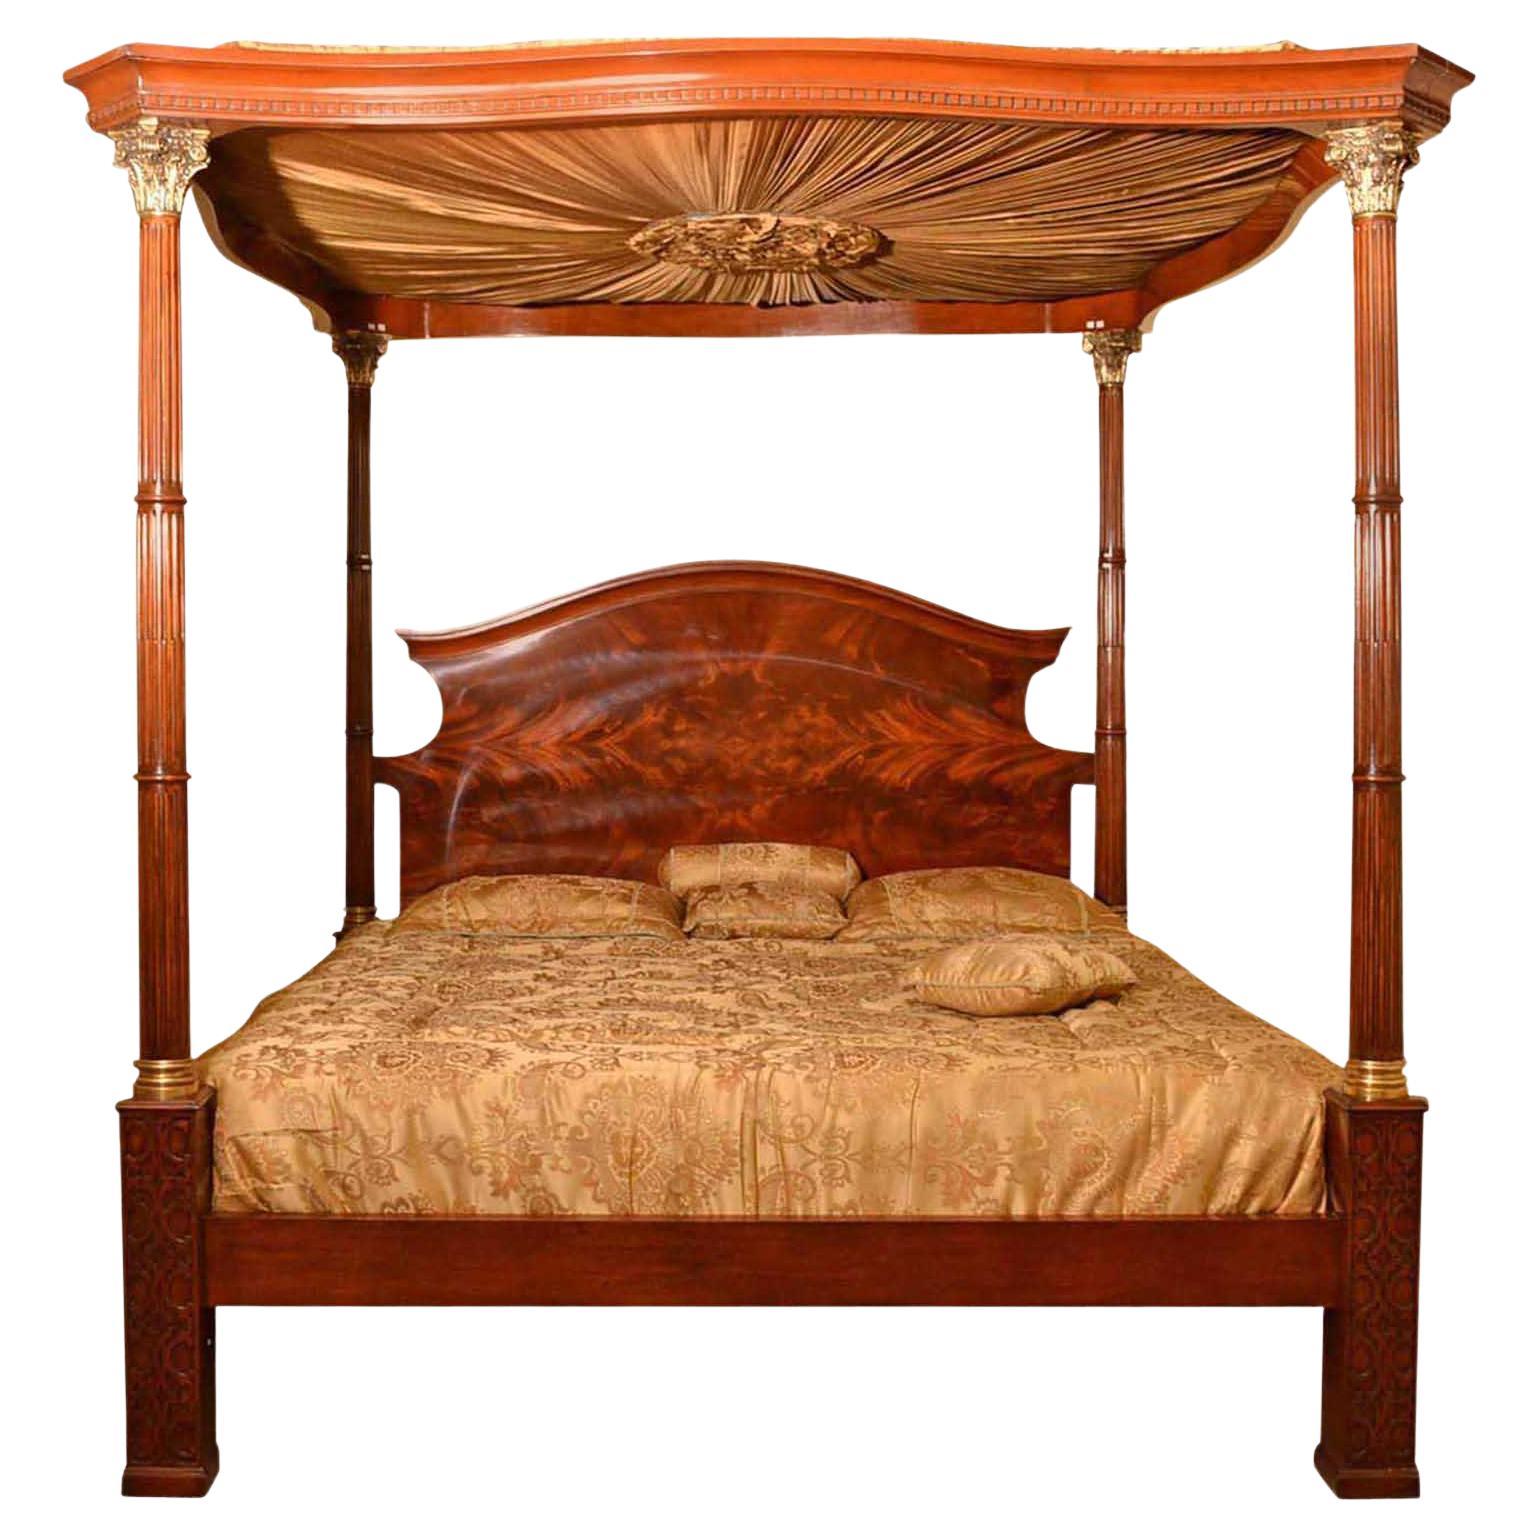 Vintage Super King Mahogany Four Poster Bed with Silk Canopy, 20th C